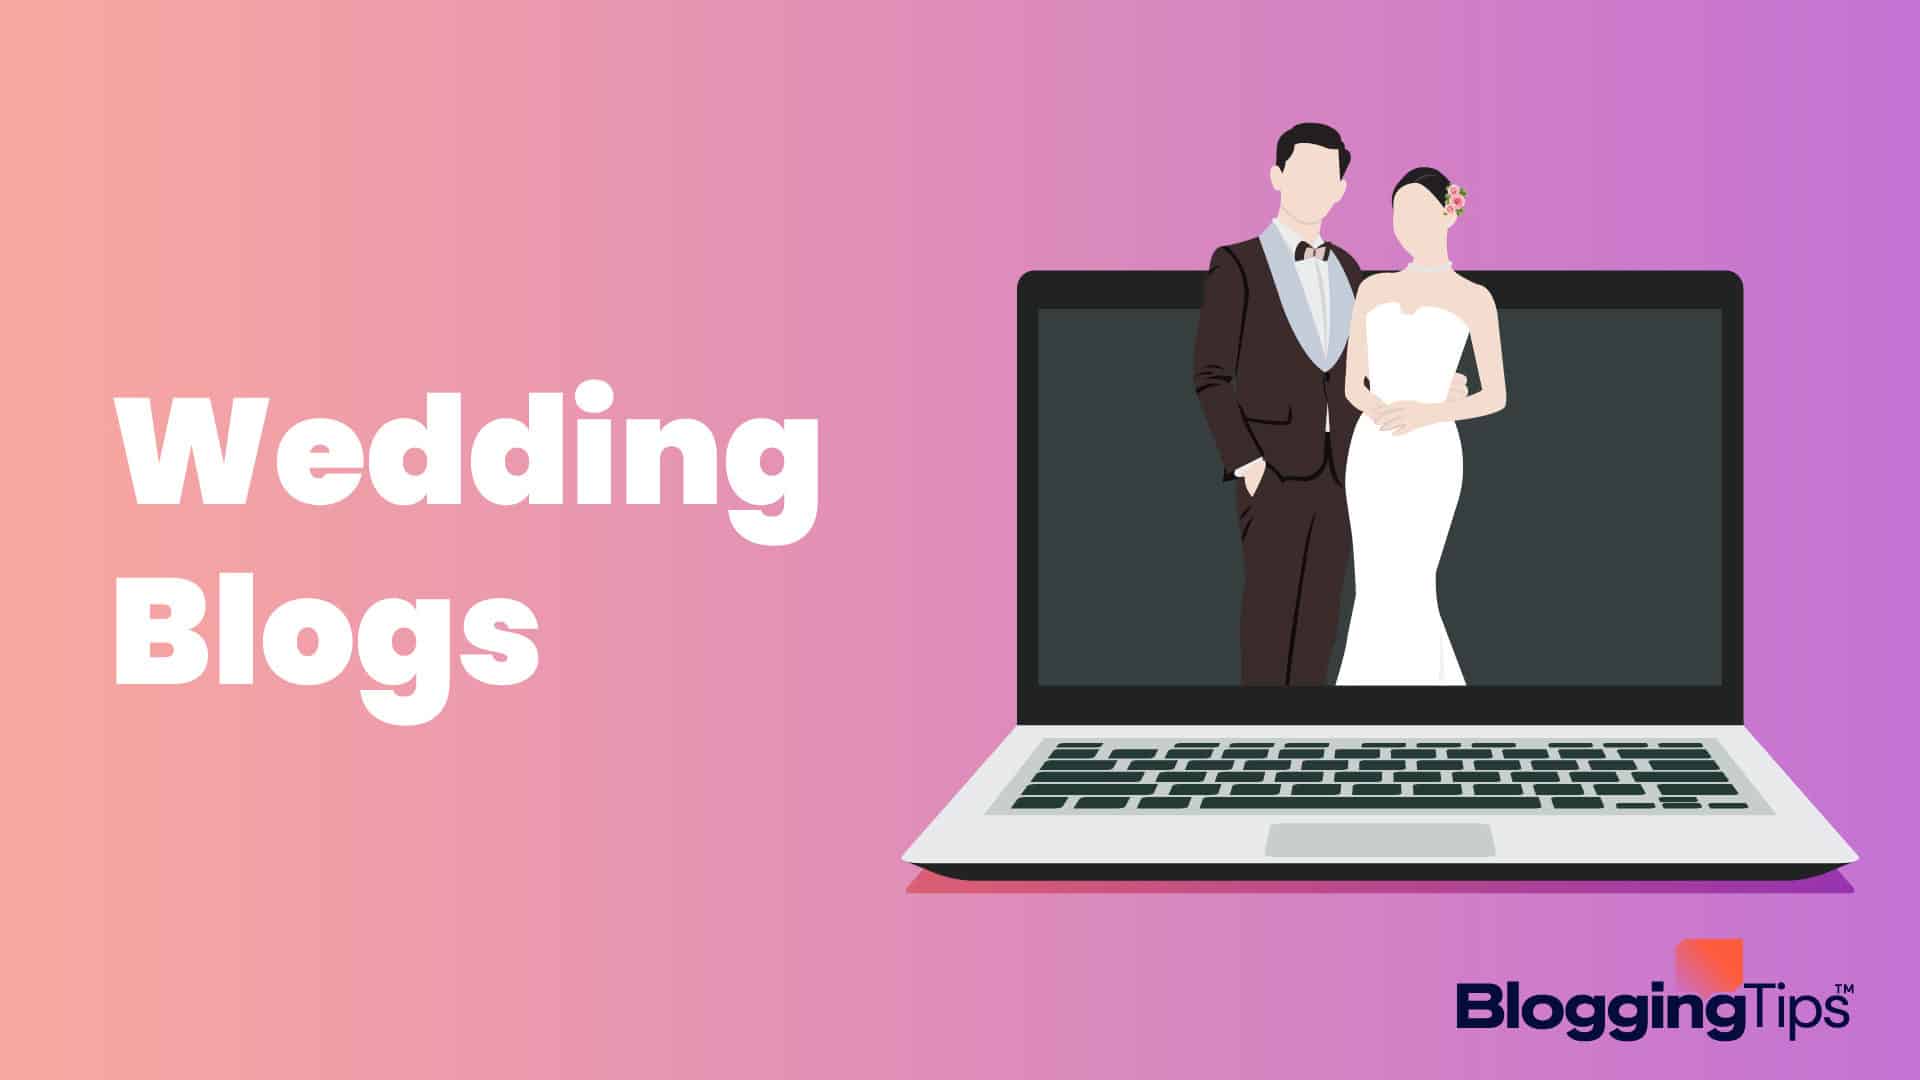 vector graphic showing an illustration of two people getting married with the big block text 